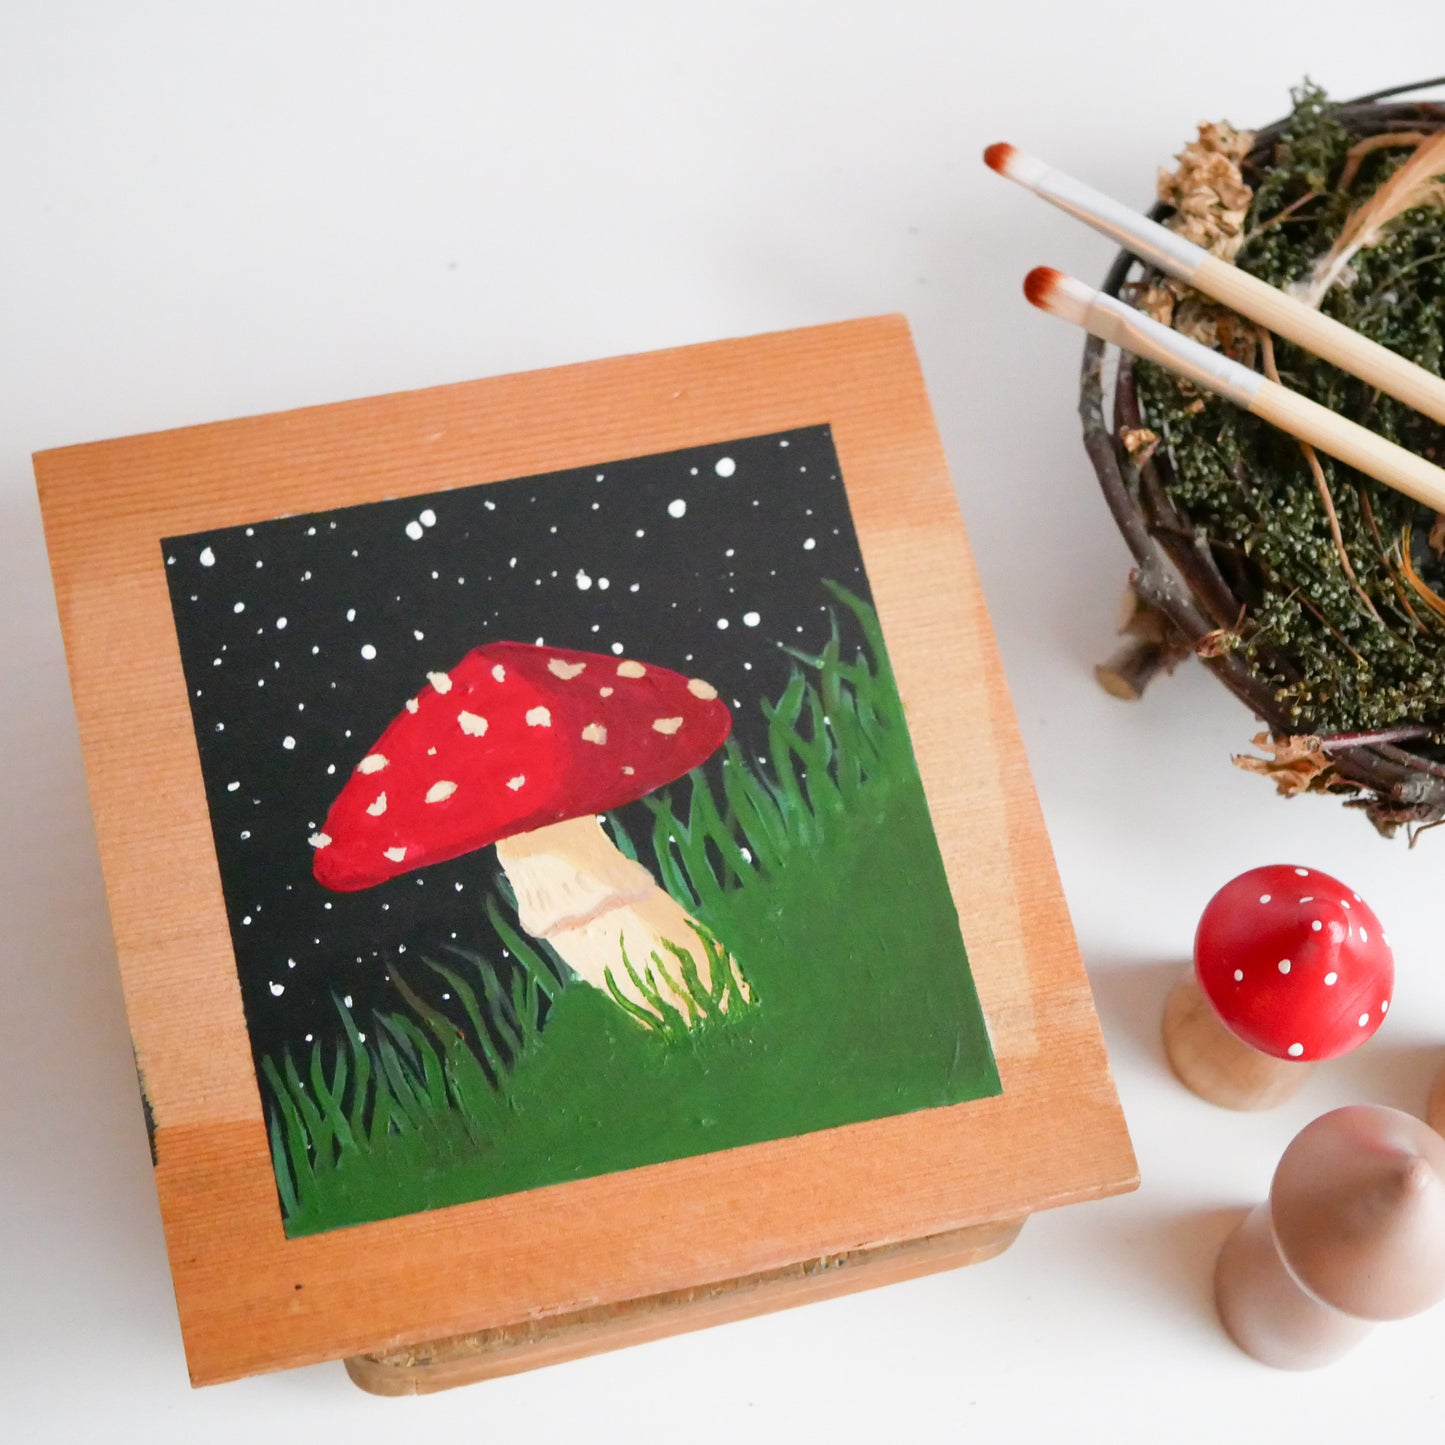 Private Group Class (only register if part of this group) - Mushroom Painting - Tuesday 10/17 5:30-7:00pm